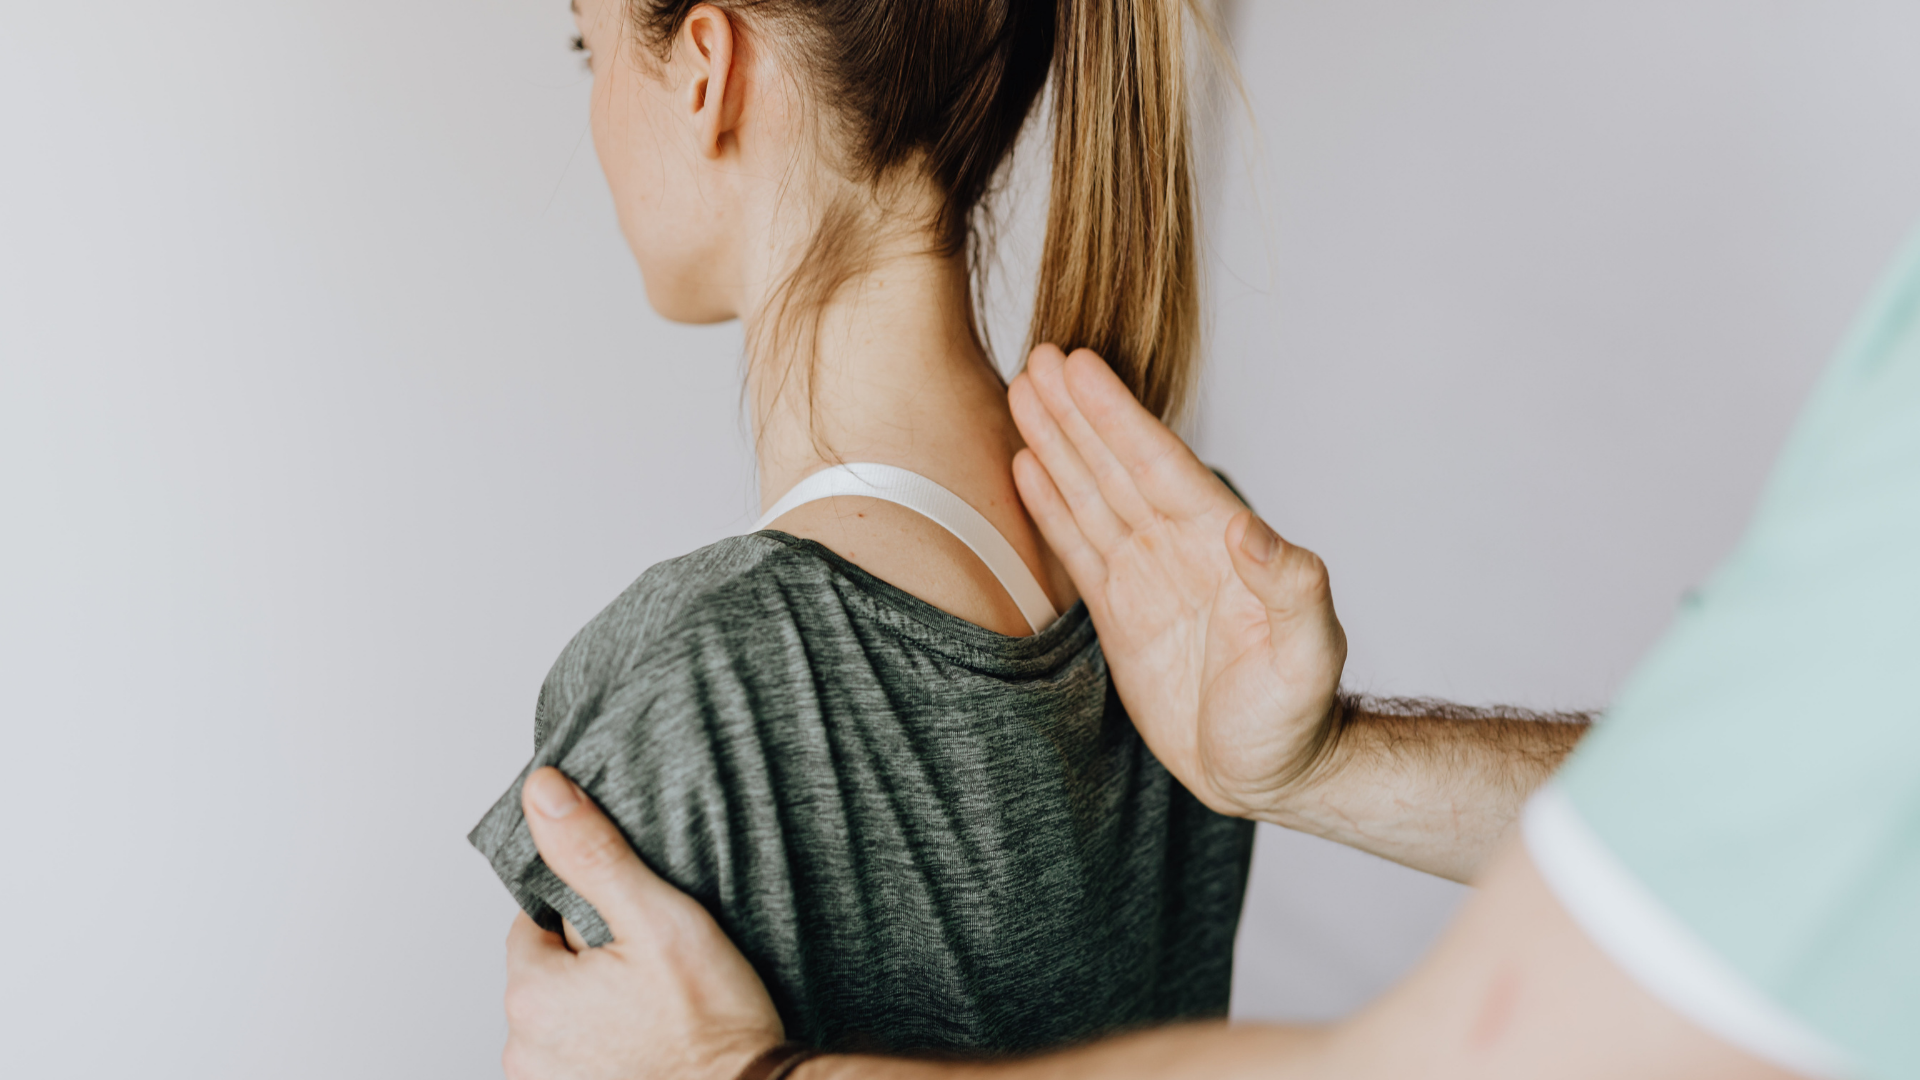 A man using his hand to demonstrate how a posture corrector helps a woman maintain proper posture